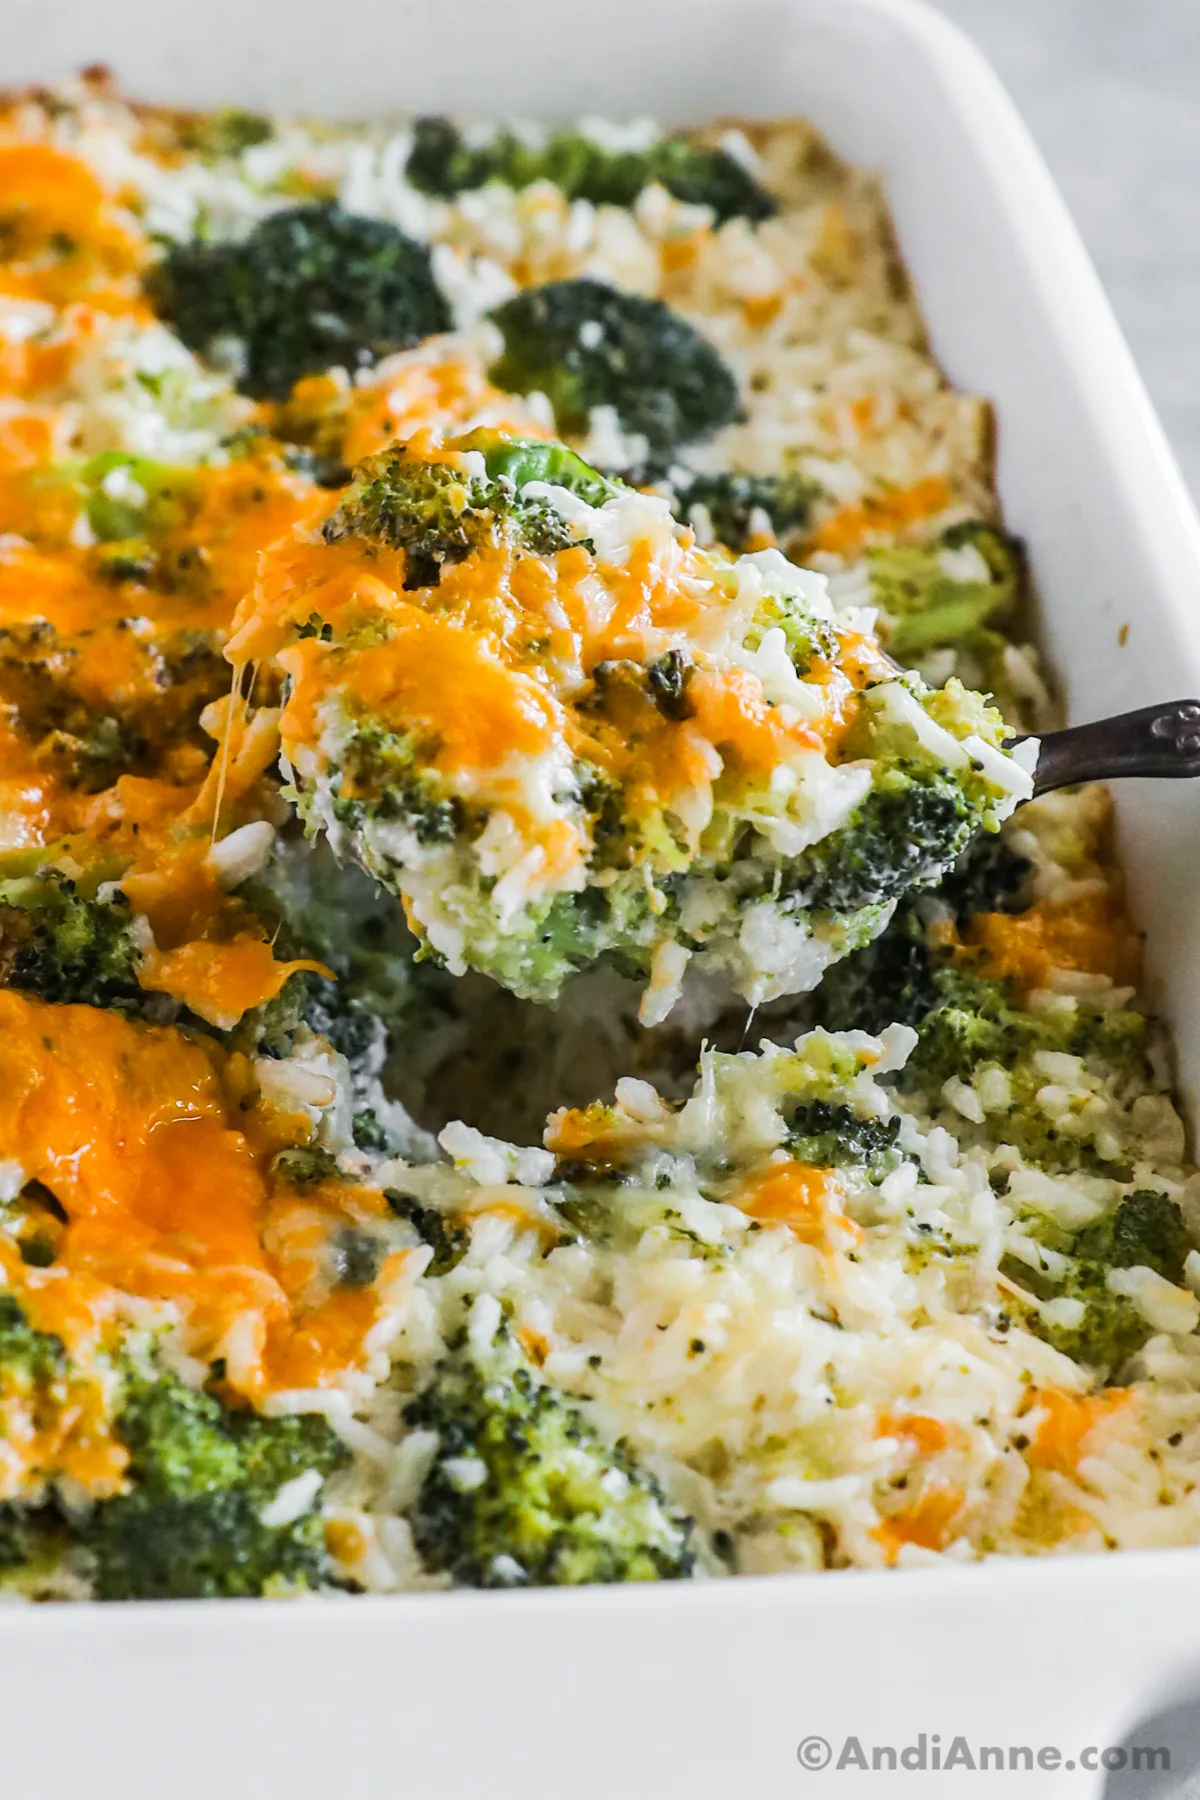 Close up of a spoon scooping some broccoli cheese rice casserole from the dish.